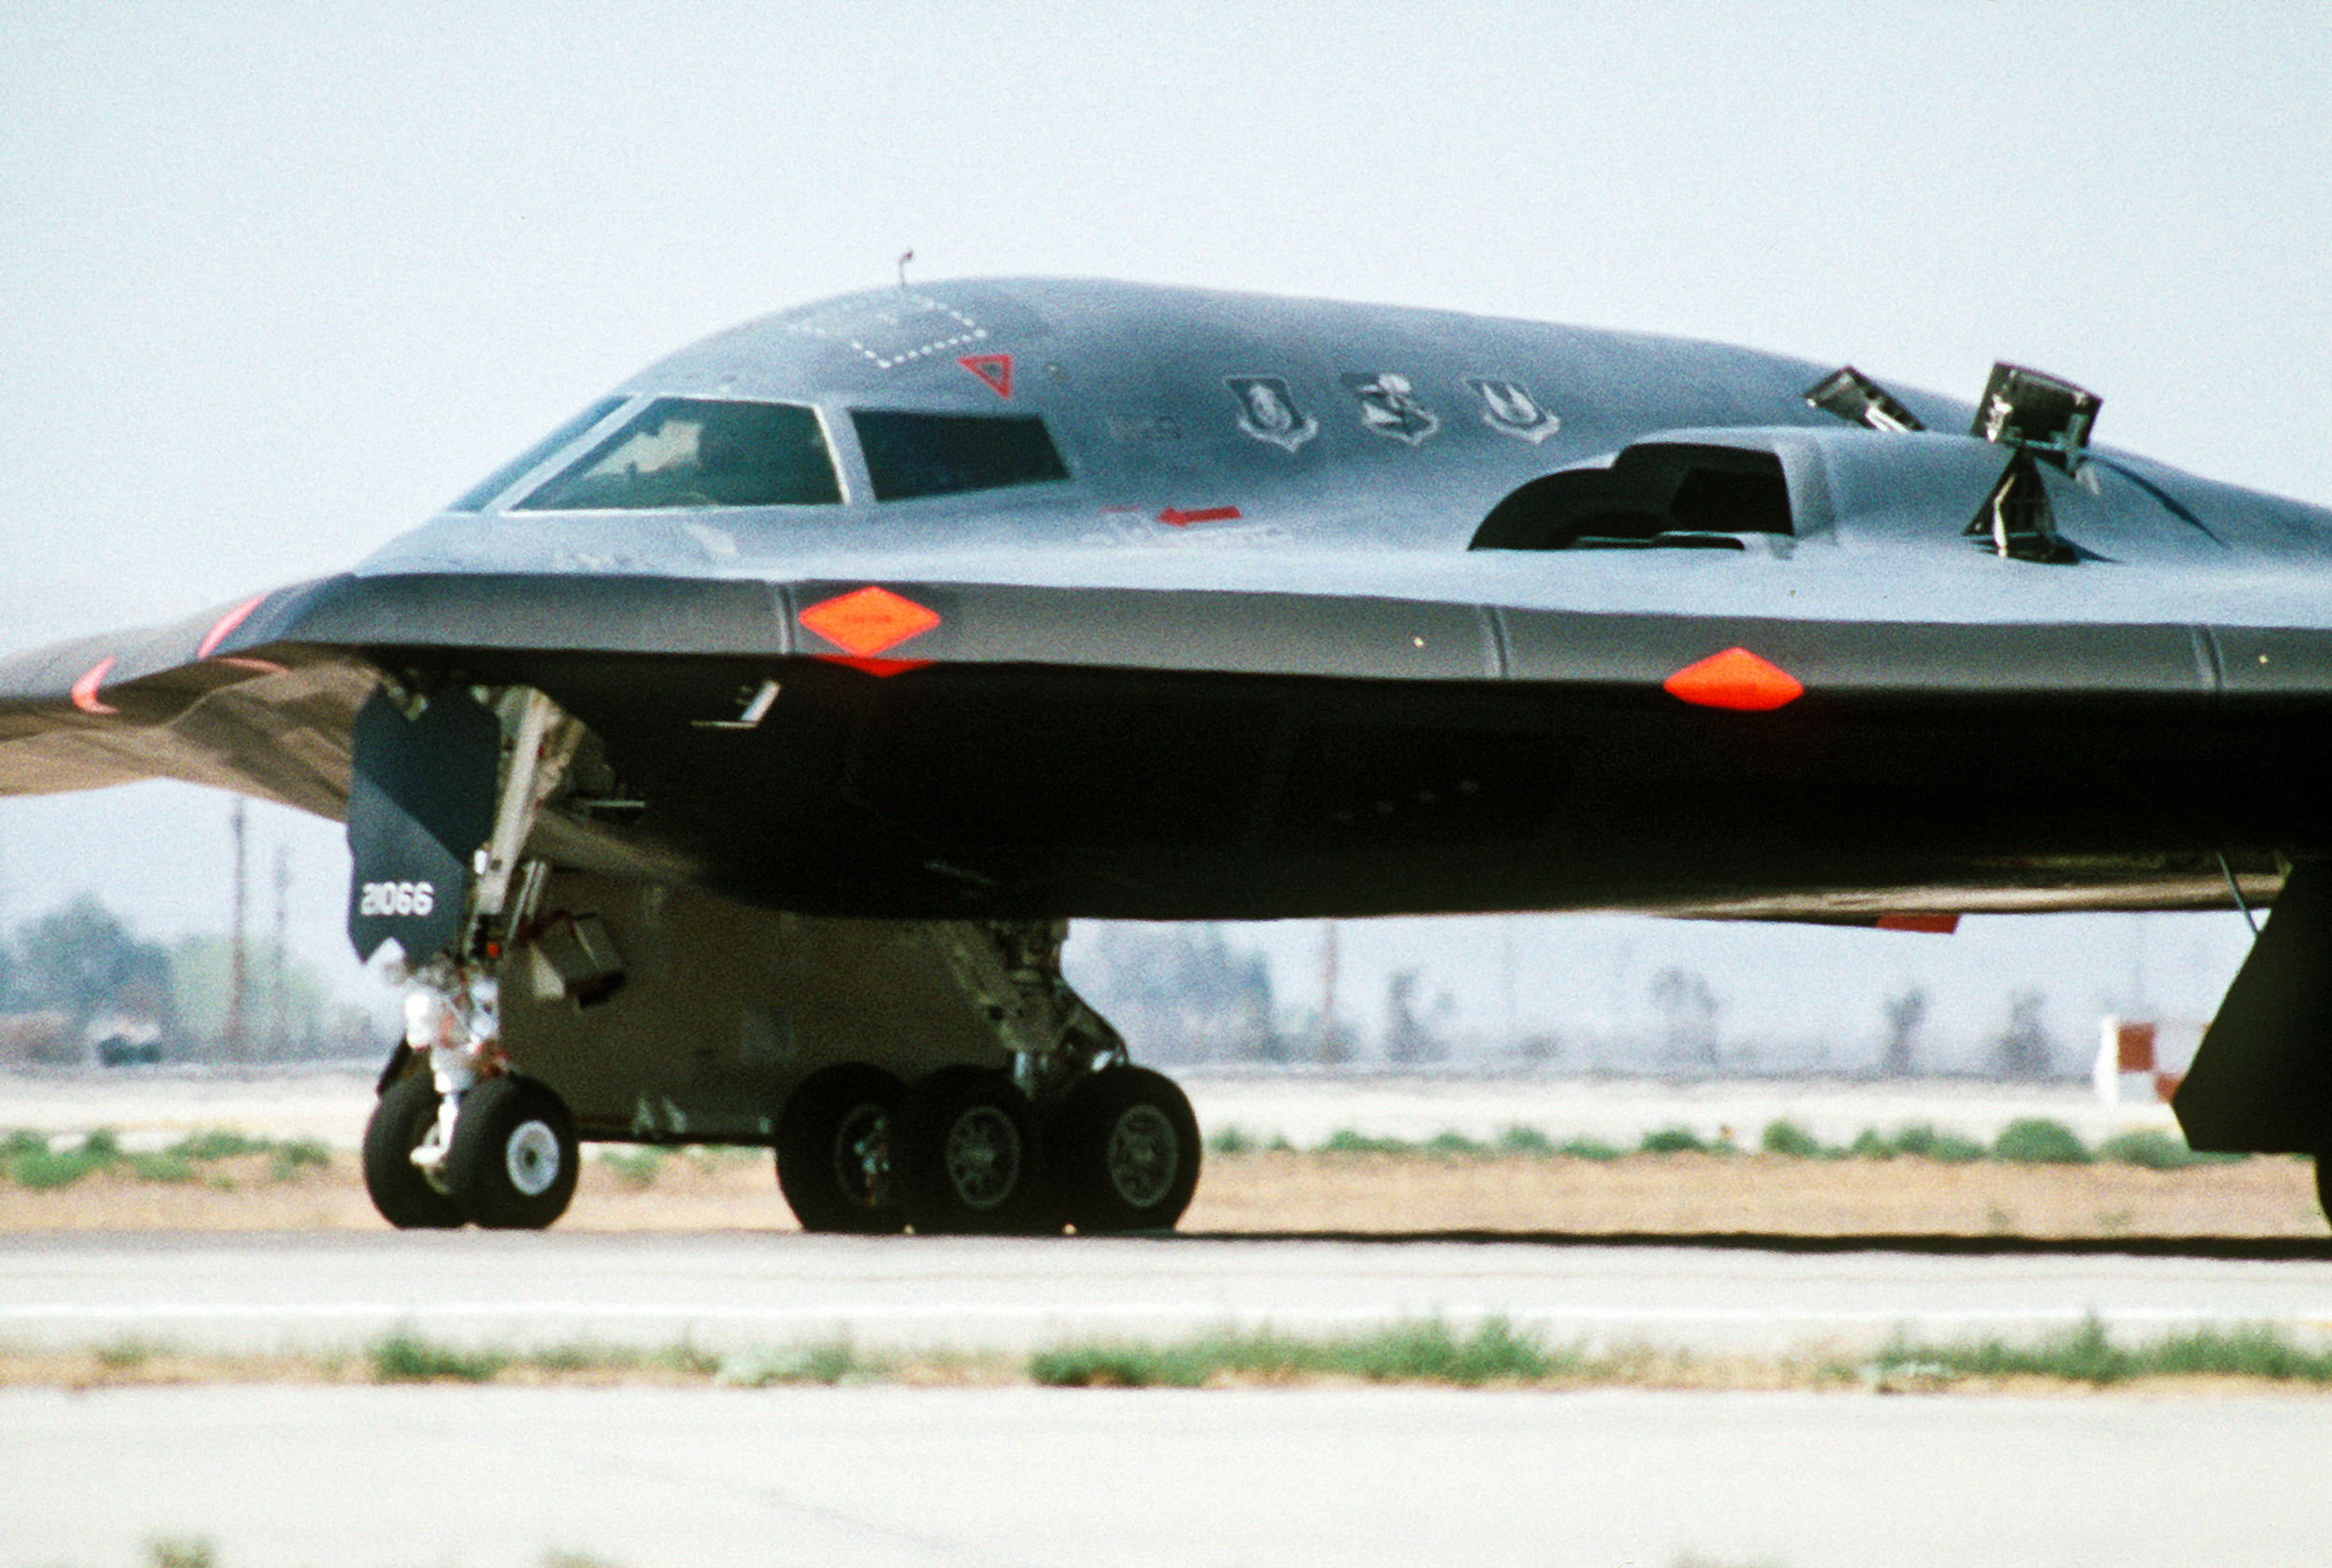 A_left_side_view_of_the_front_of_a_B-2_advanced_technology_bomber_aircraft_as_it_prepares_for_its_first_flight,_at_the_Air_Force_Flight_Test_Center_DF-ST-90-07390.jpg